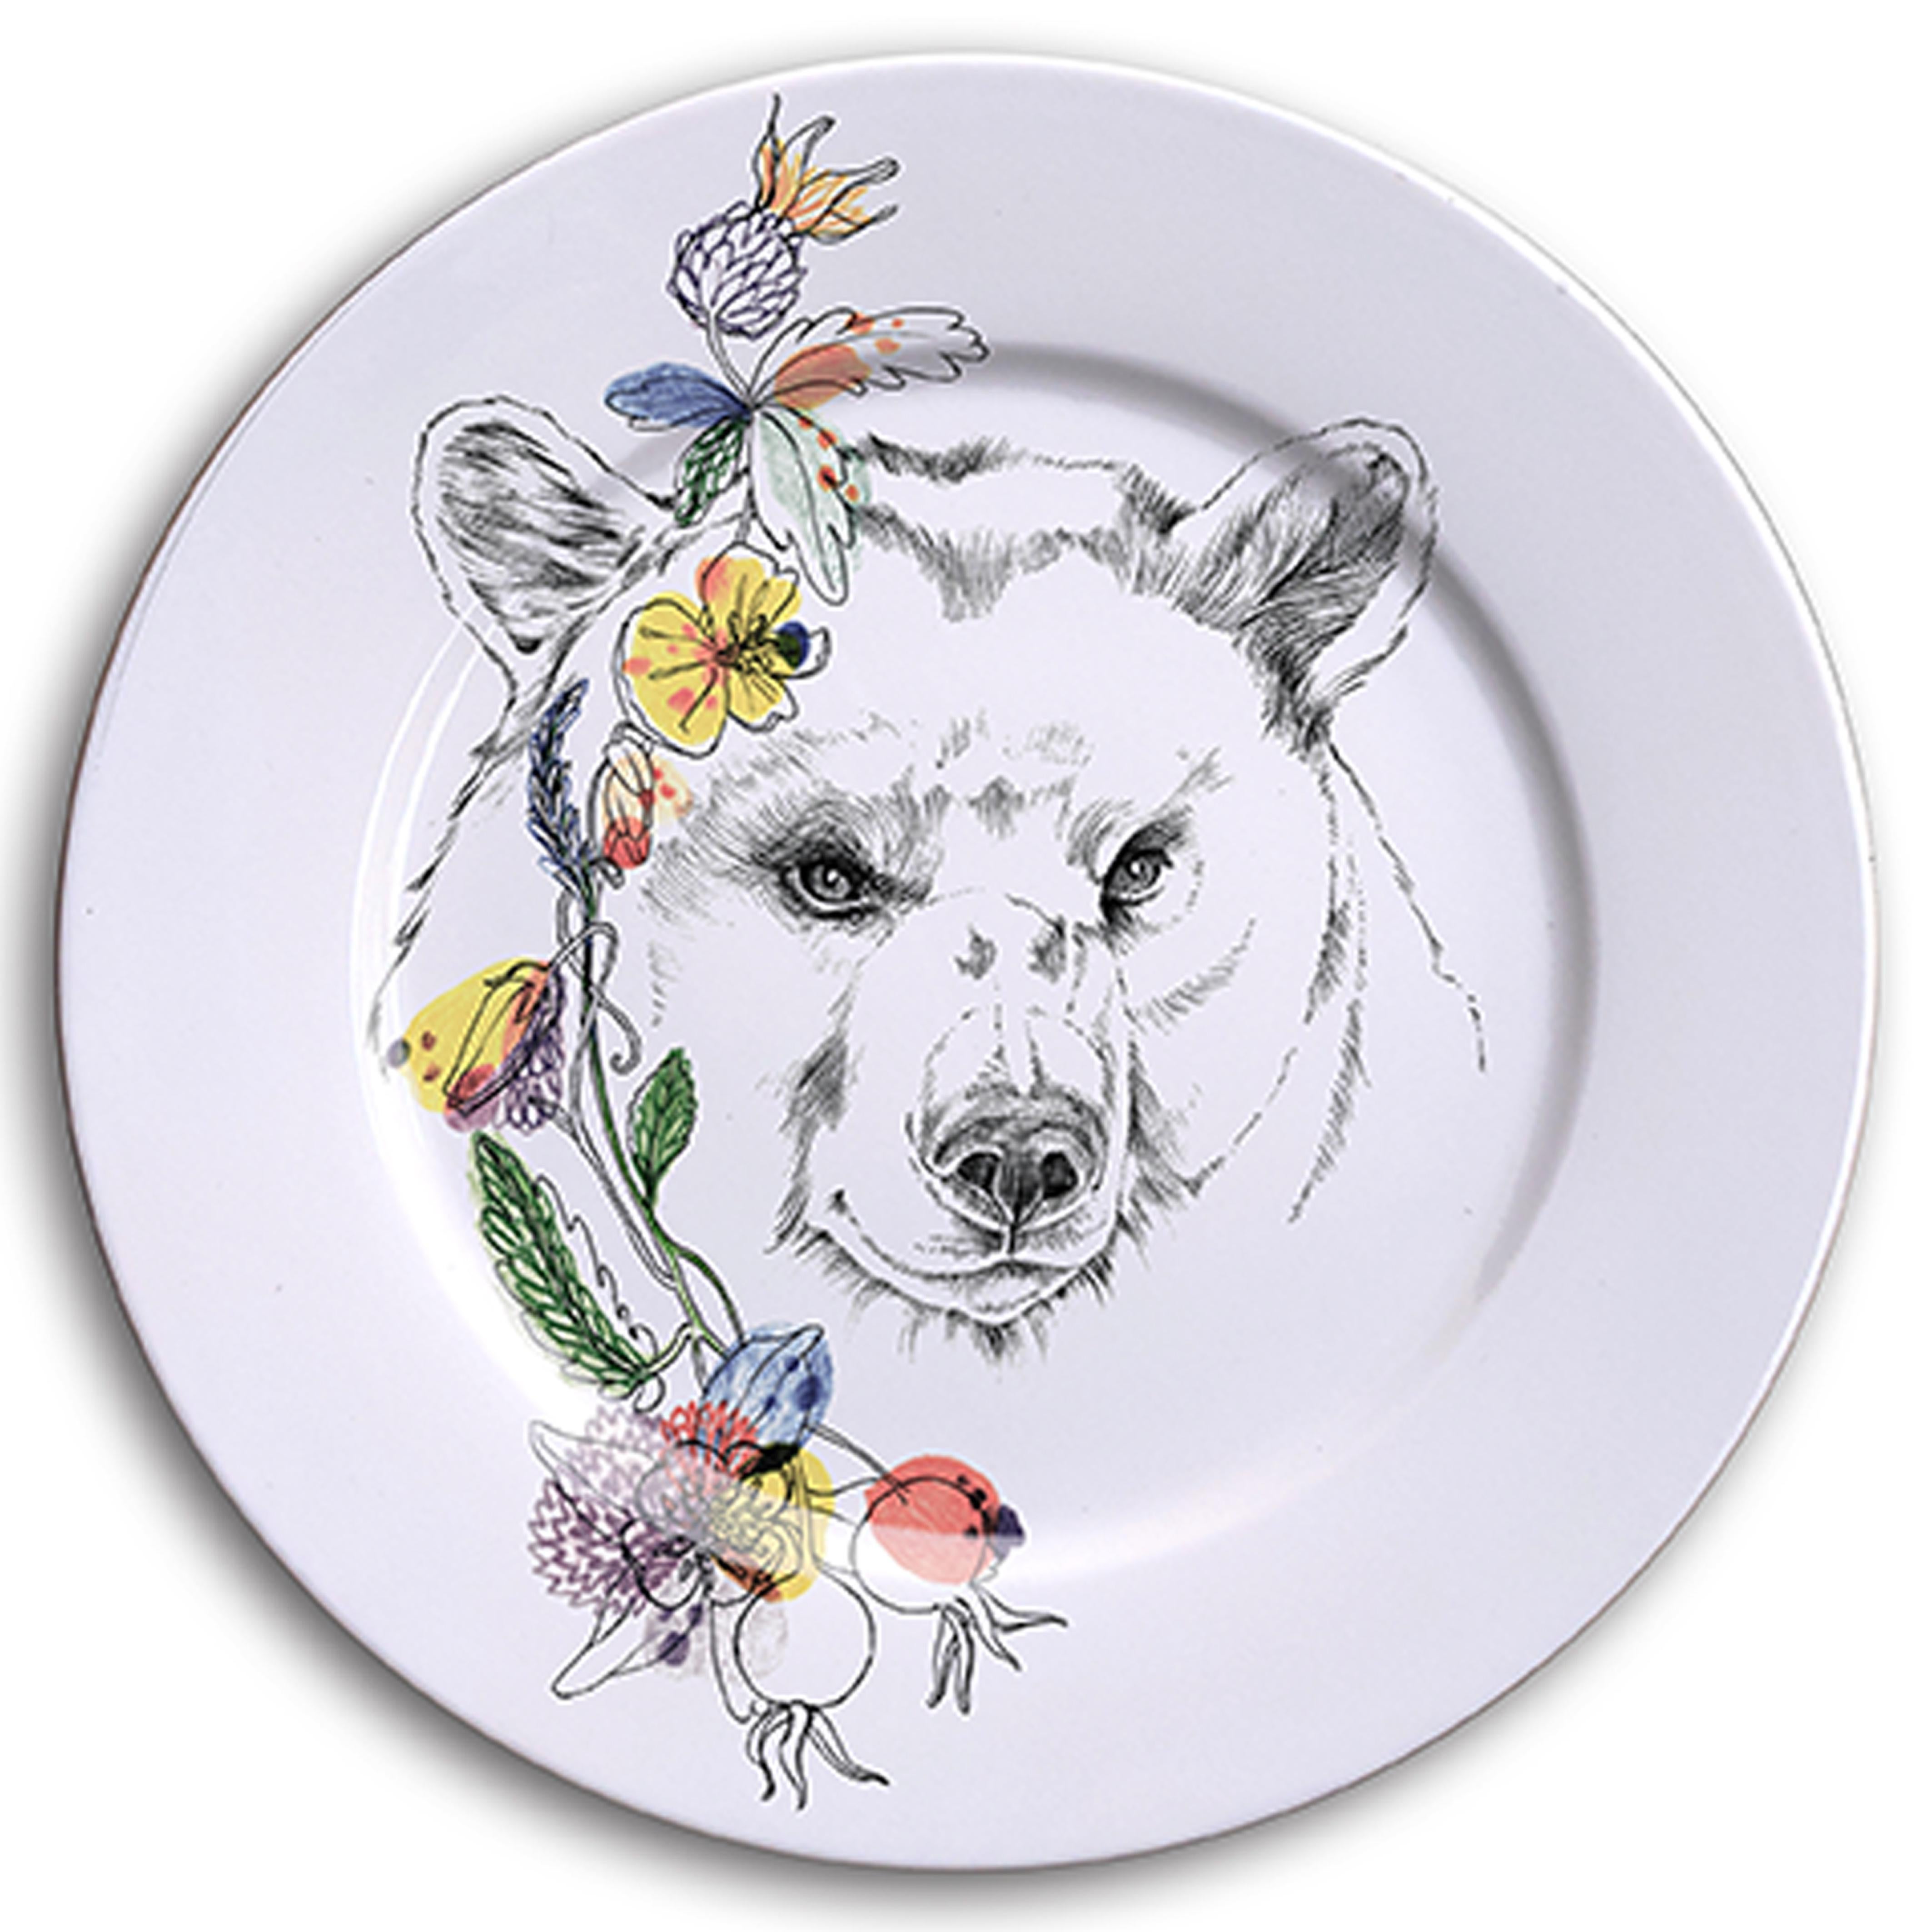 Ode to the Woods, Six Contemporary Porcelain Dinner Plates with Animals&Flowers For Sale 2